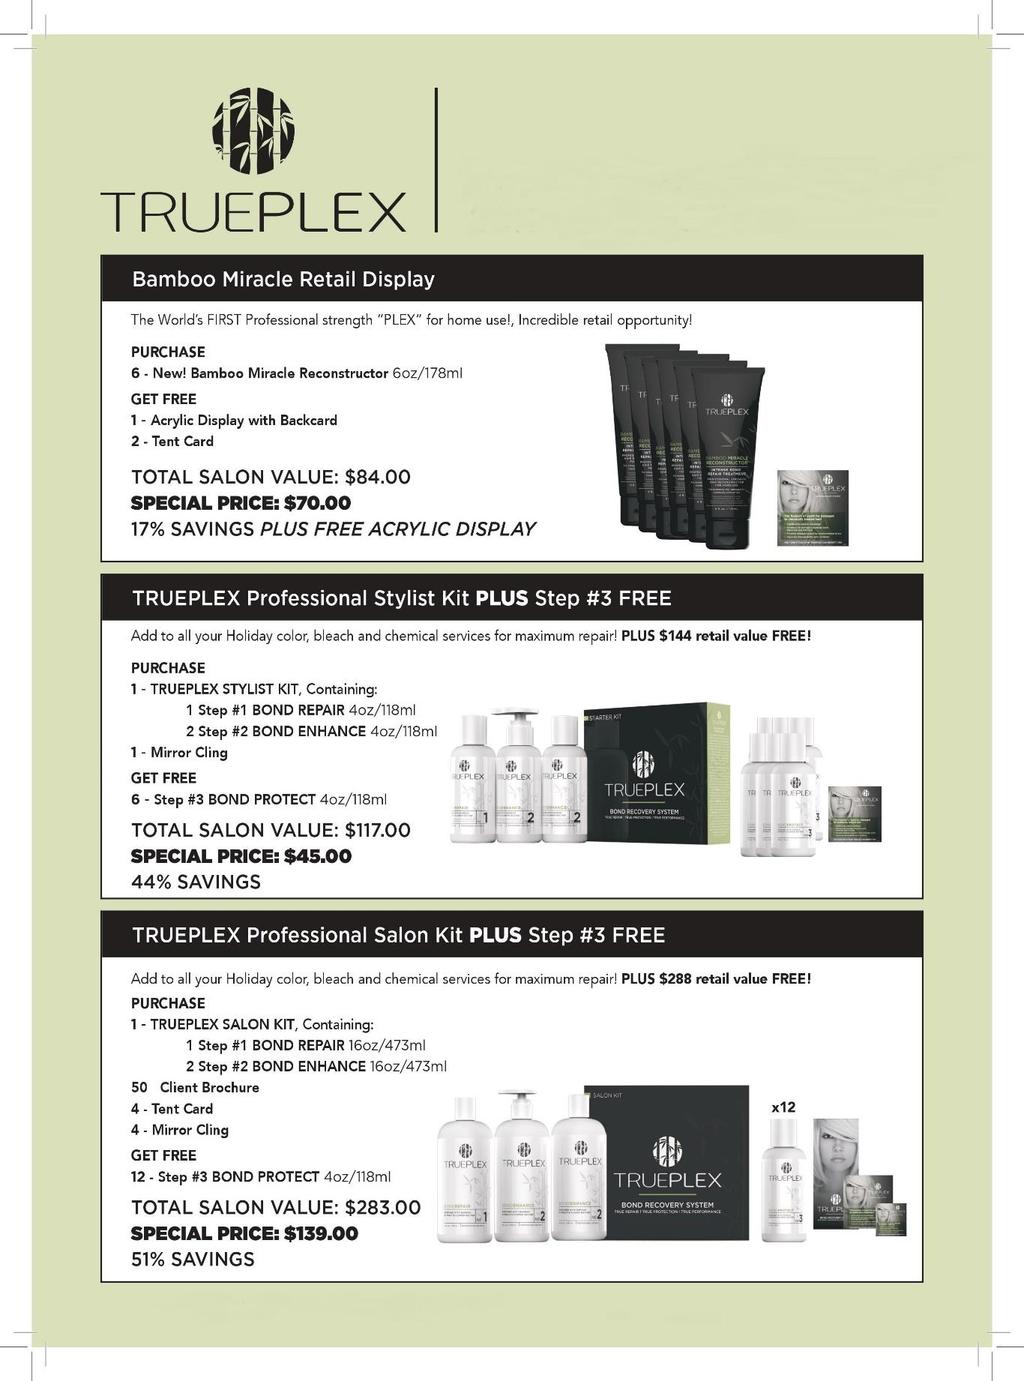 TRUE PROFESSIONALS TRUEPLEX should be included with every service or used as repair and